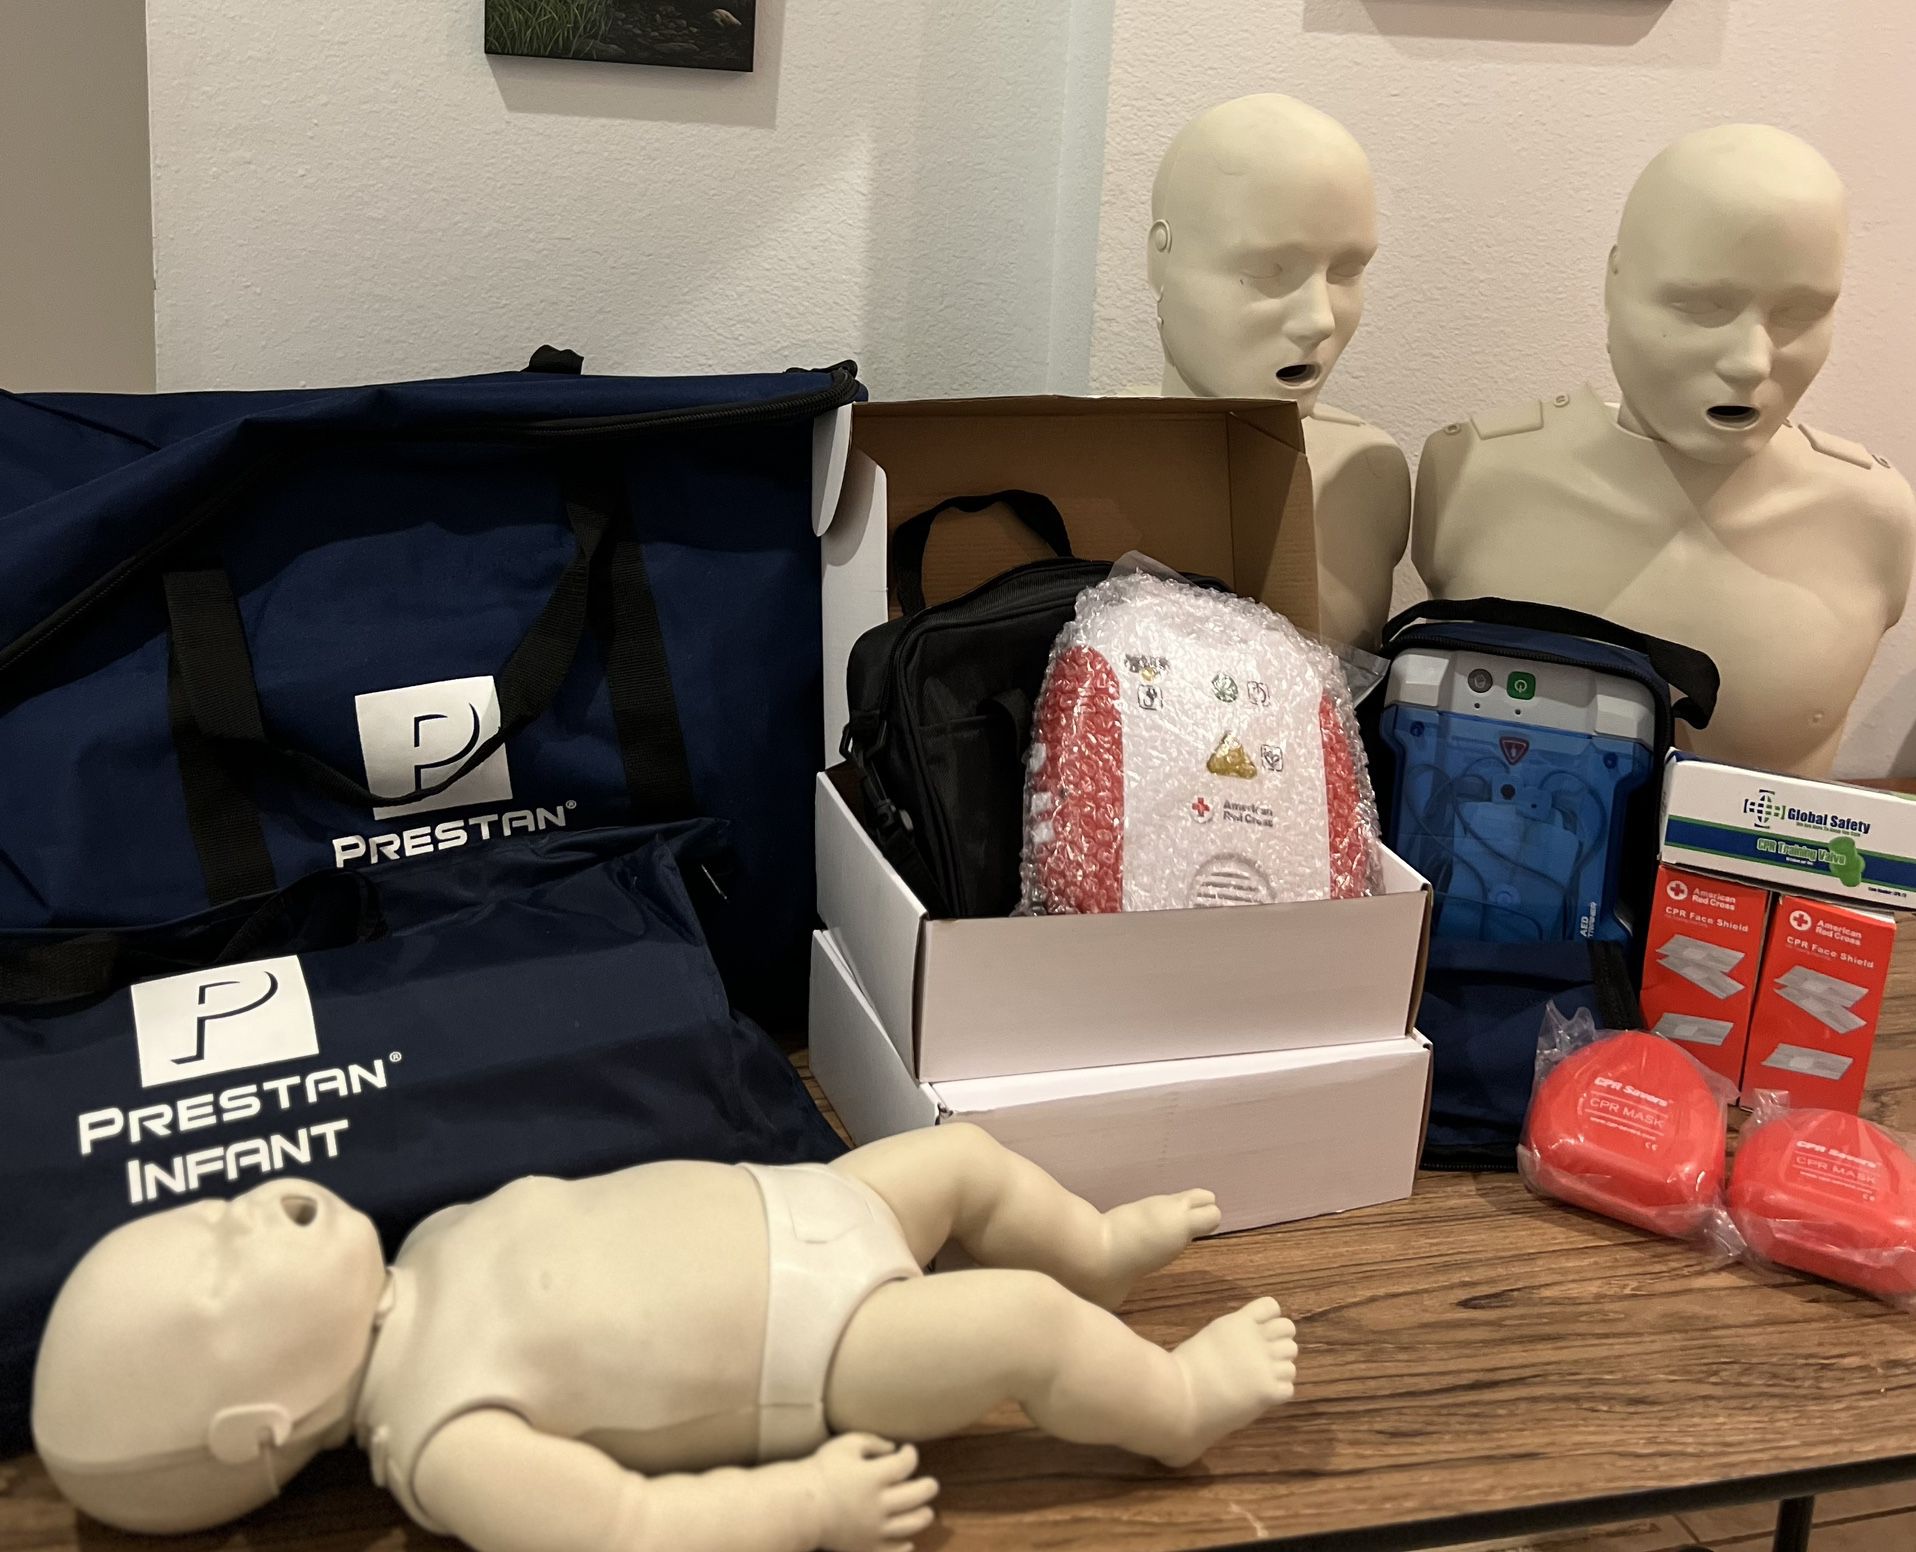 CPR Manikins Adult & Infant, AED Training Devices, Mask, Shields